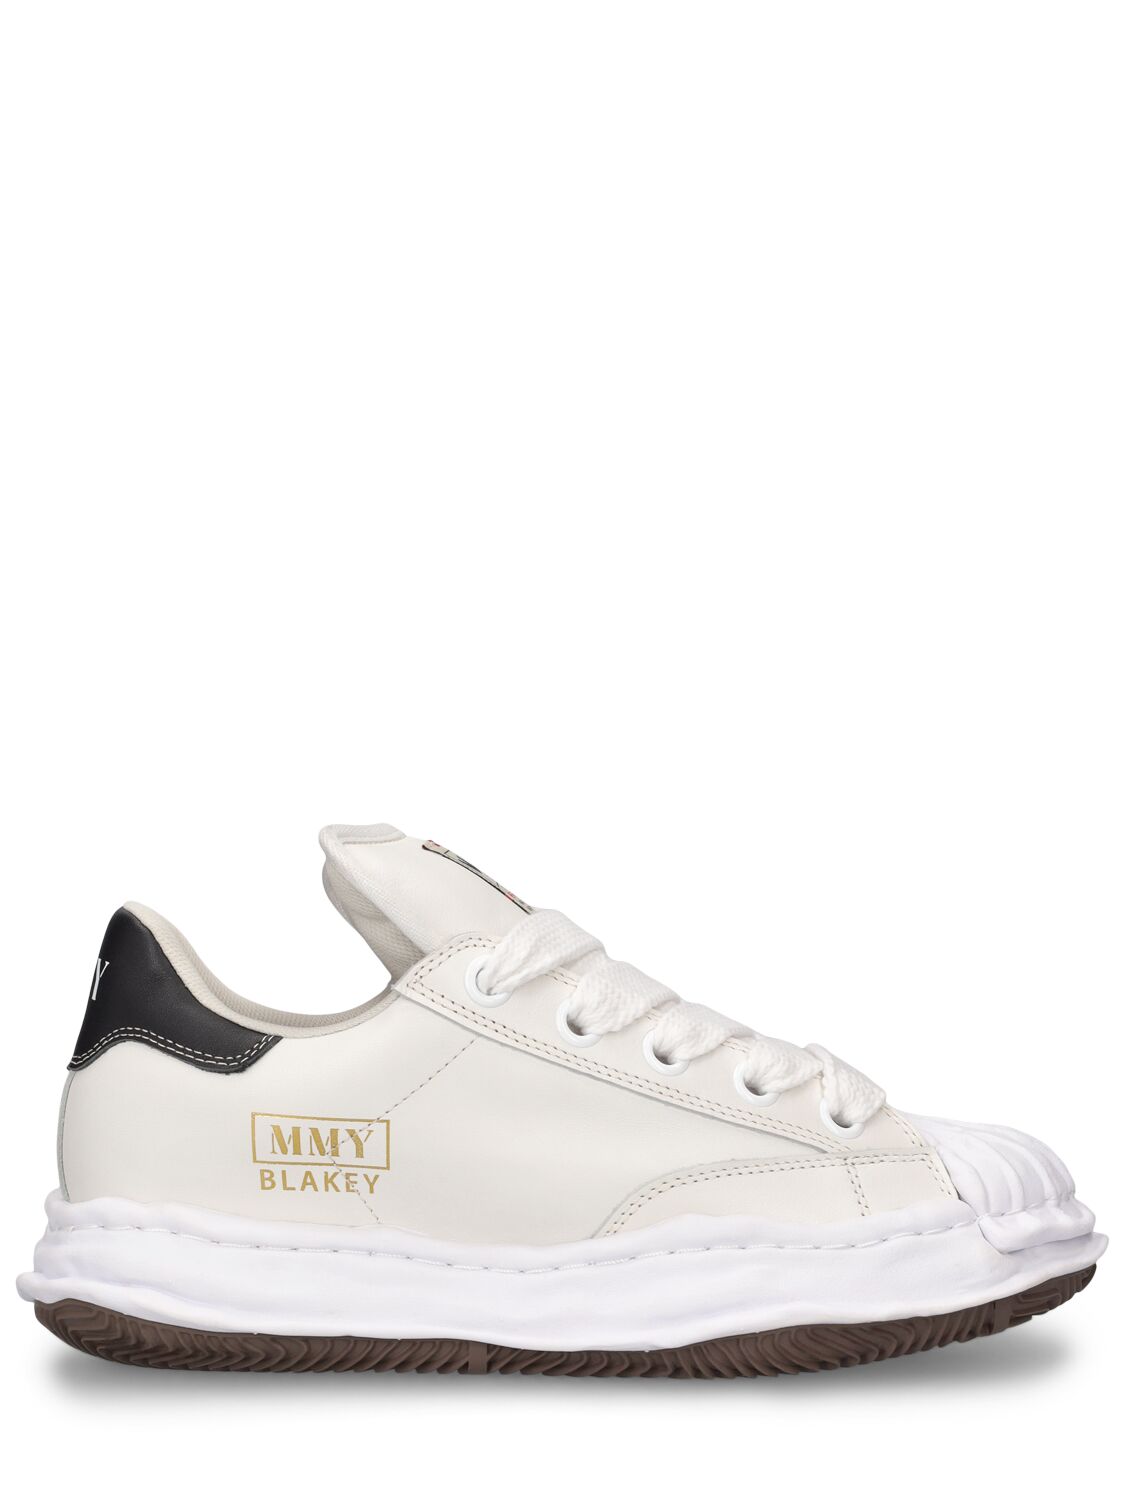 Image of Blakey Leather Low Top Sneakers